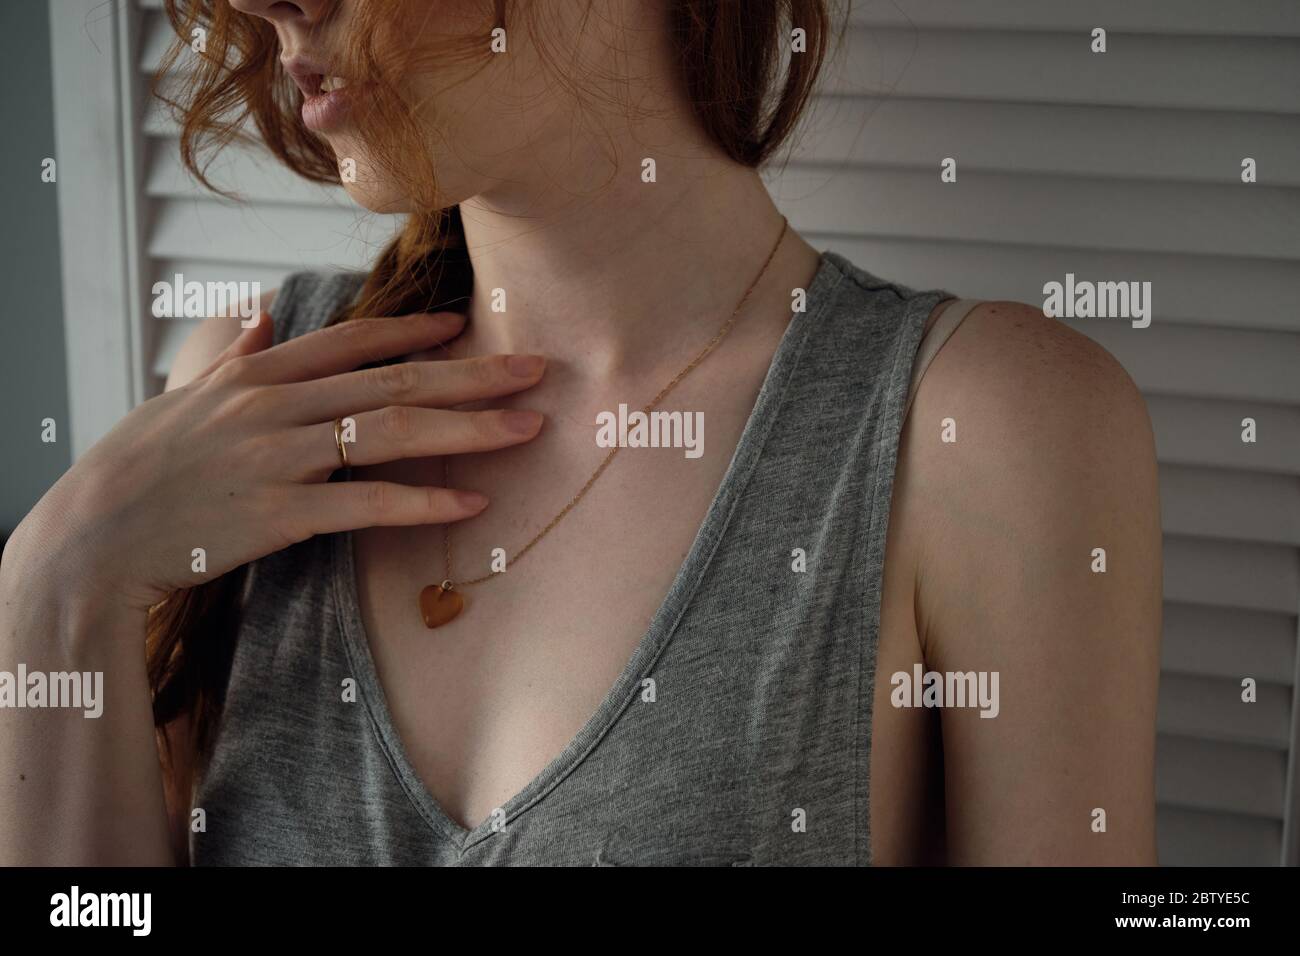 Body parts. Close shot of the hands of a red-haired girl on the collarbone, lips, shoulders, wavy hair Stock Photo